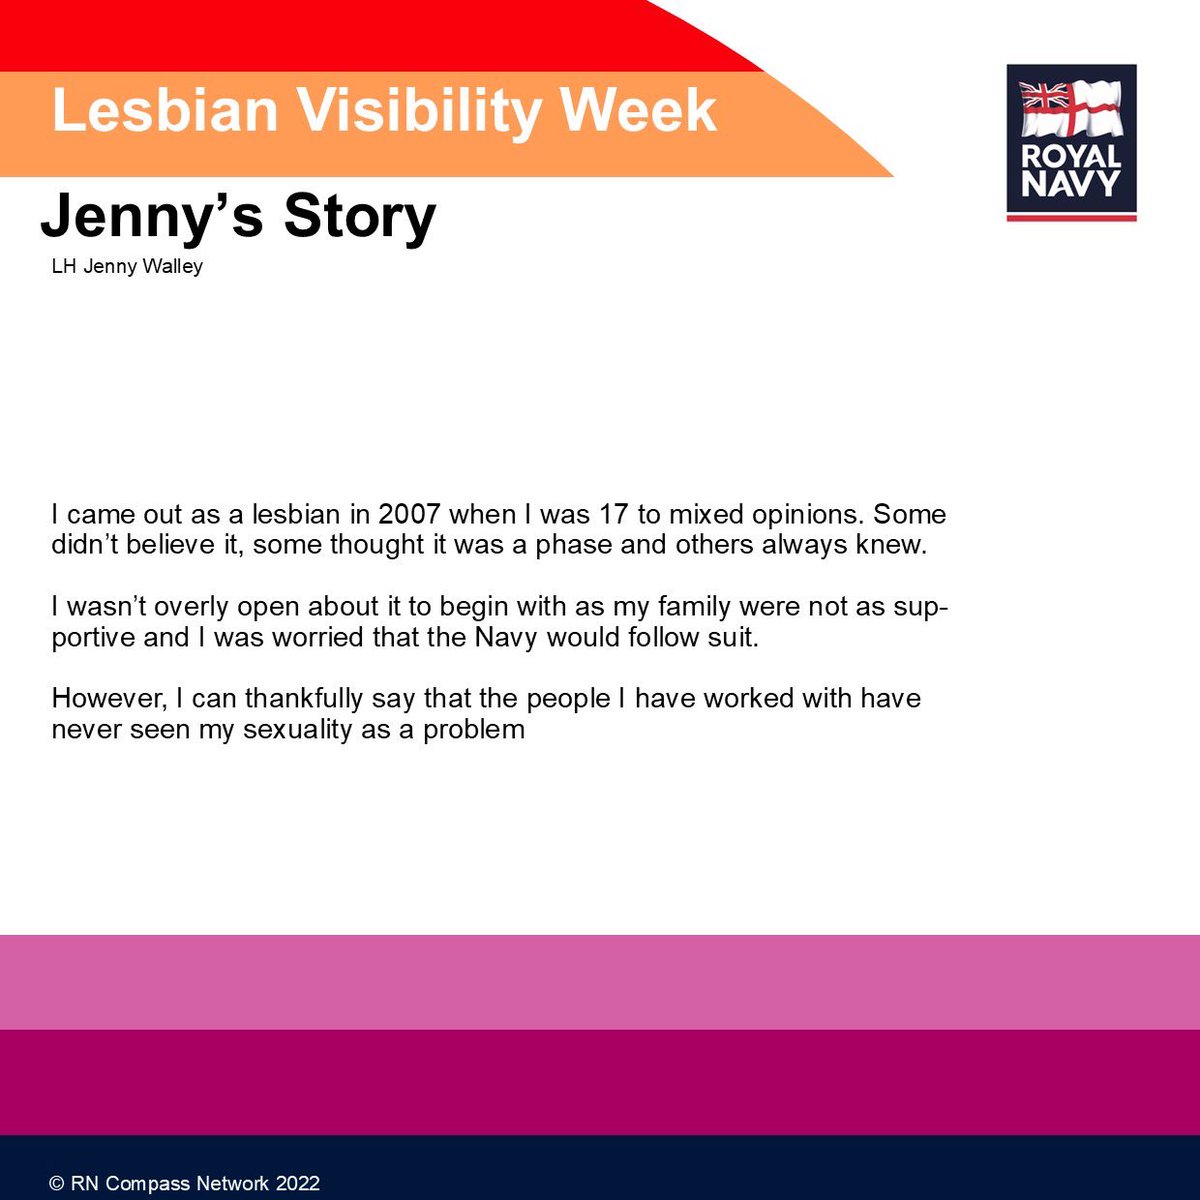 As part of #LesbianVisibilityWeek we are sharing some of the amazing stories of our Service Women. Today we are sharing Jenny’s story. 

#NavyPride https://t.co/HU3A9i1mMO